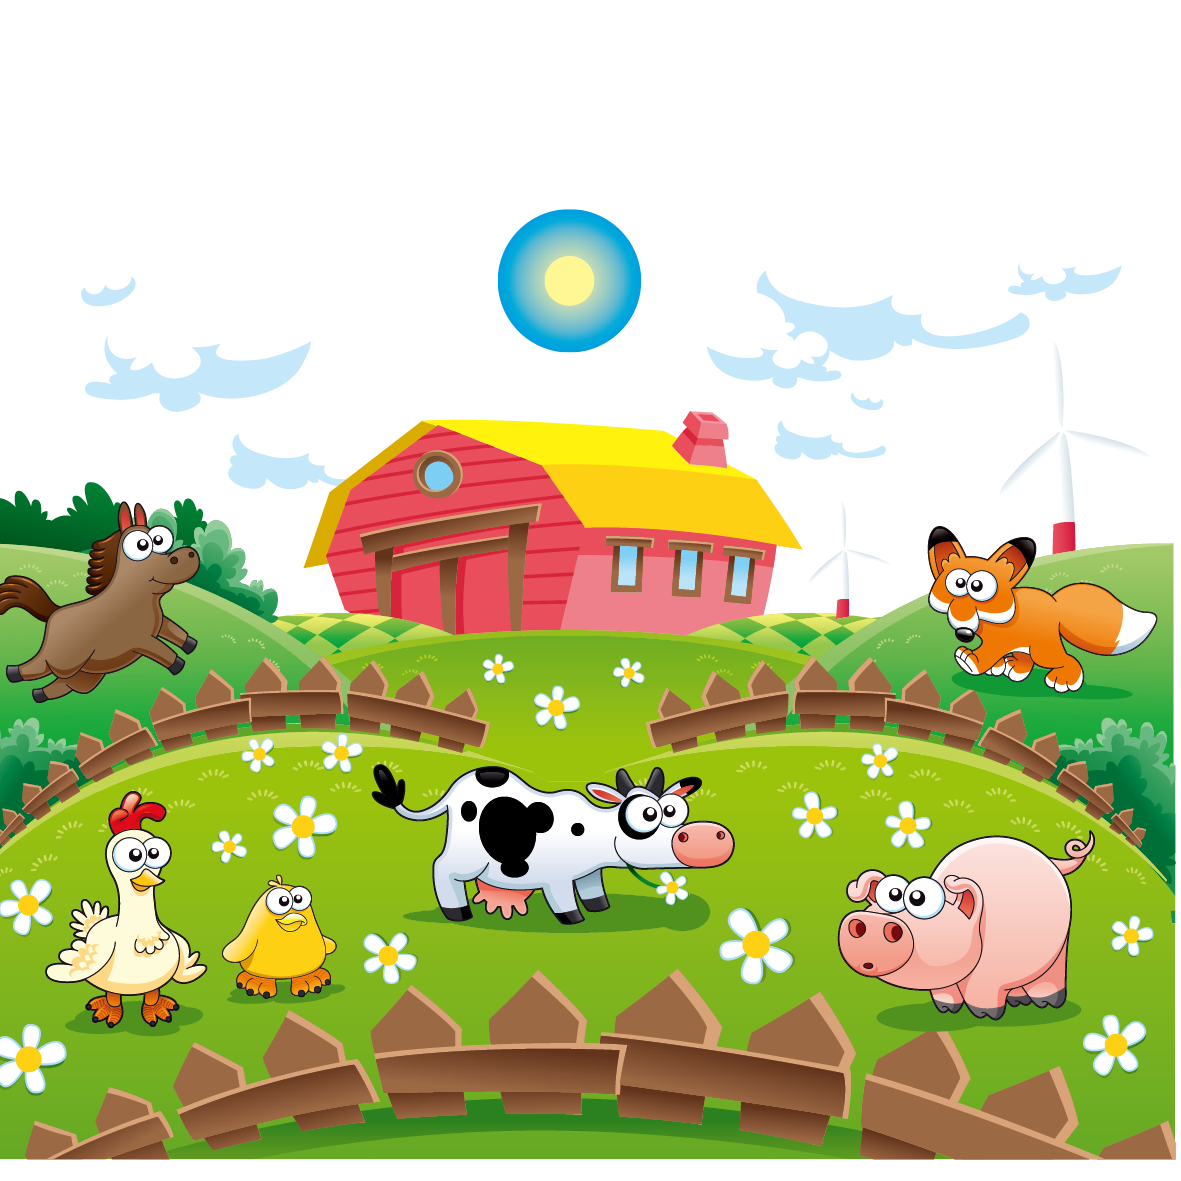 Download Cute Farm Illustration Animal Cattle Cartoon Clipart PNG Free